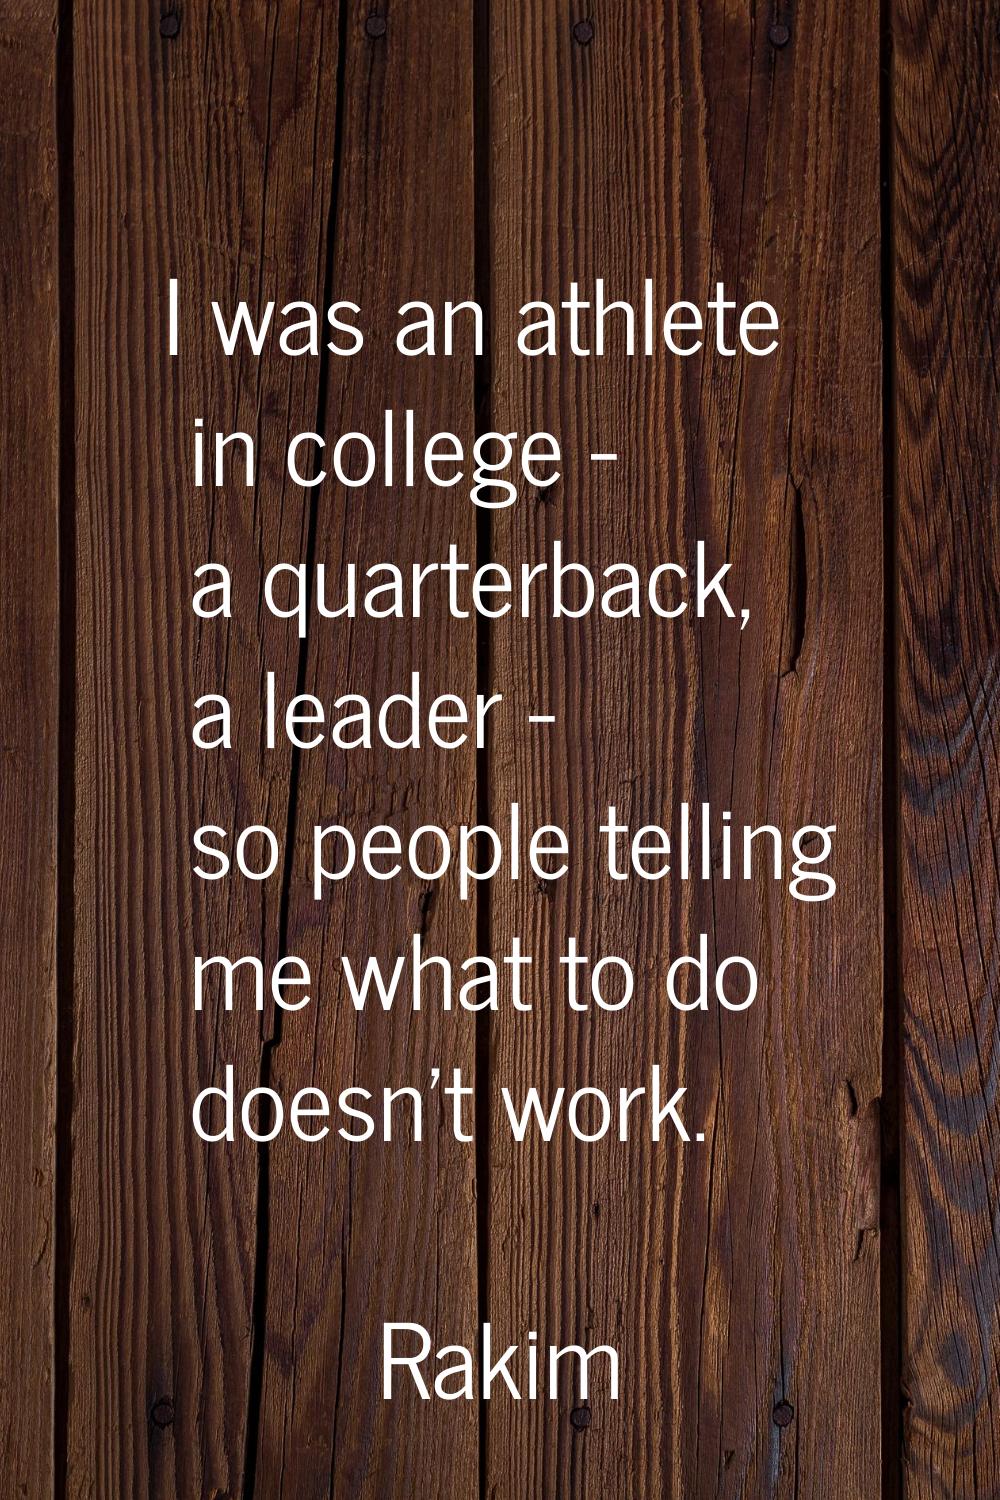 I was an athlete in college - a quarterback, a leader - so people telling me what to do doesn't wor